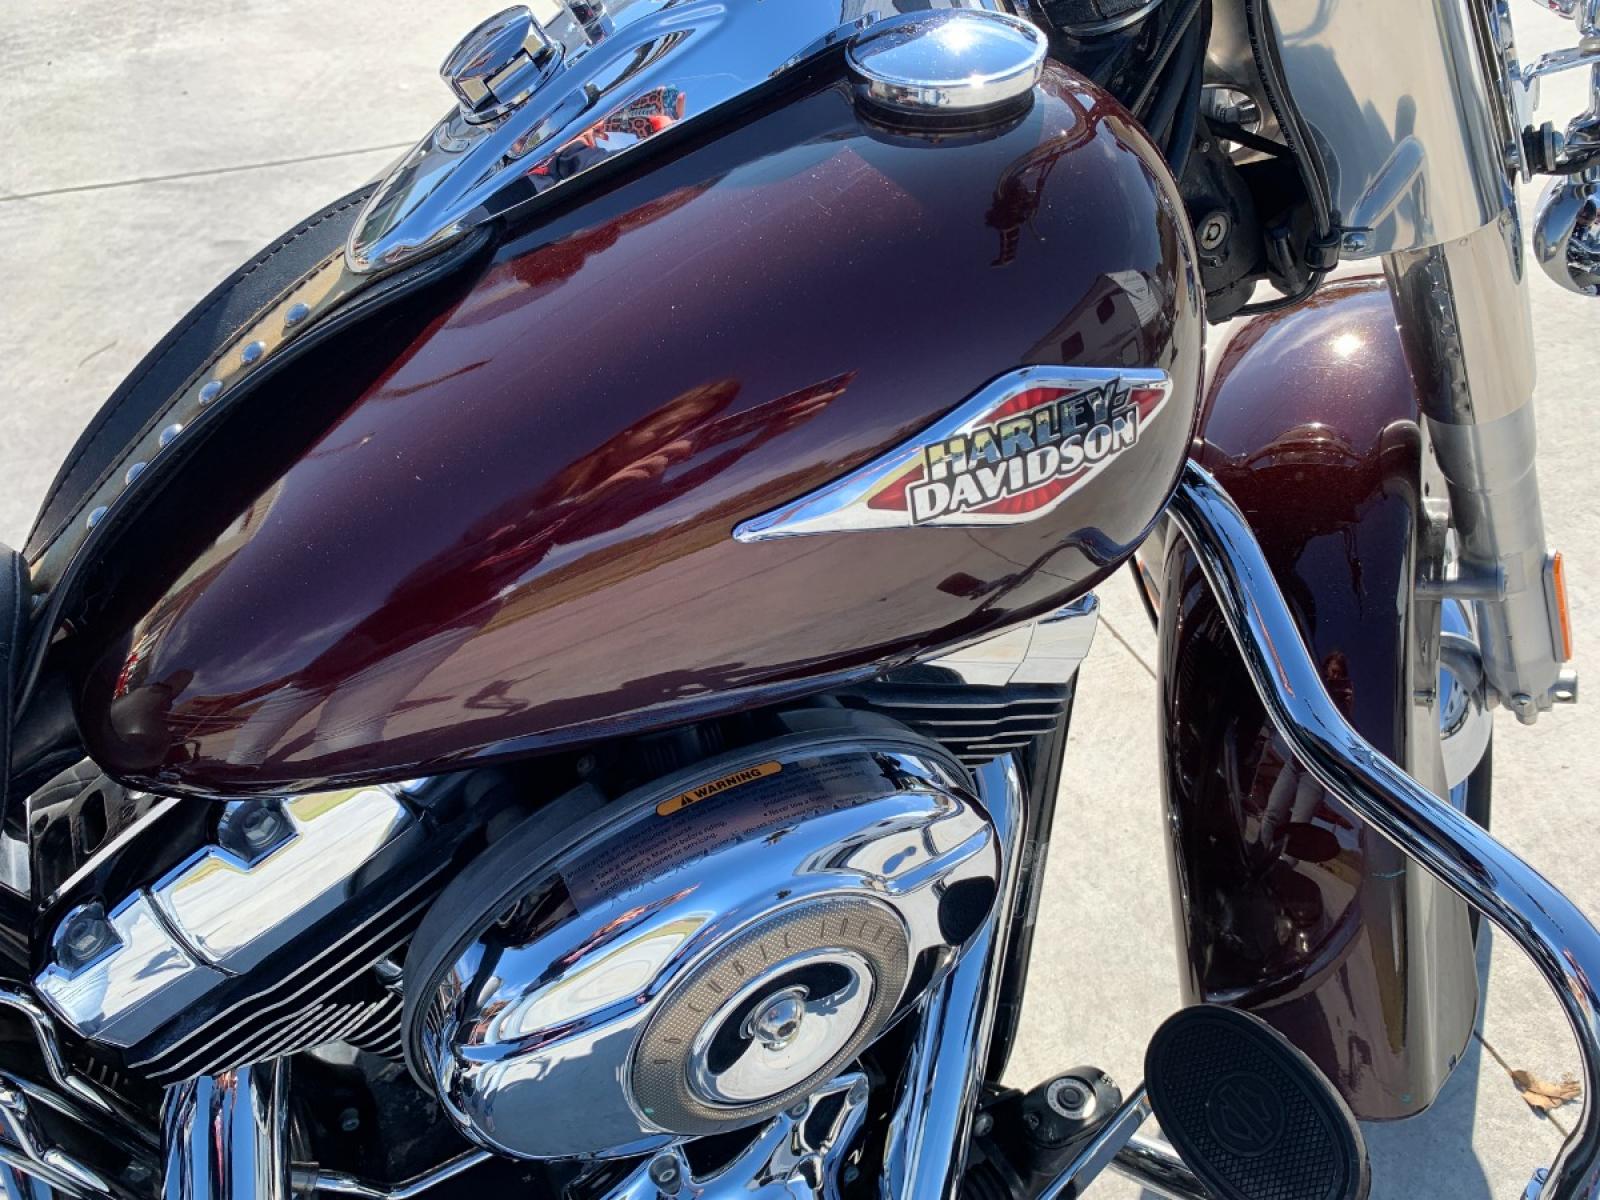 2009 PURPLE Harley-Davidson FLSTC - (1HD1BW5199Y) , located at 17760 HWY 62, MORRIS, 74445, 35.609104, -95.877060 - 2009 HARLEY- DAVIDSON FLSTC HERITAGE SOFTAIL 1584CC FEATURES CRUISE CONTROL, CHROME PASSING LAMPS, CHROME STAGGERED SHORTY EXHAUST WITH DUAL MUFFLERS, STUDDED LEATHER SADDLEBAGS, AND A FULL WINDSHIELD. A SMOOTH RIDE FOR LONG-RANGE TOURING COMFORT. IT RUNS GREAT !! ONLY 14,596 MILES. ** REBUILT TITLE - Photo #11